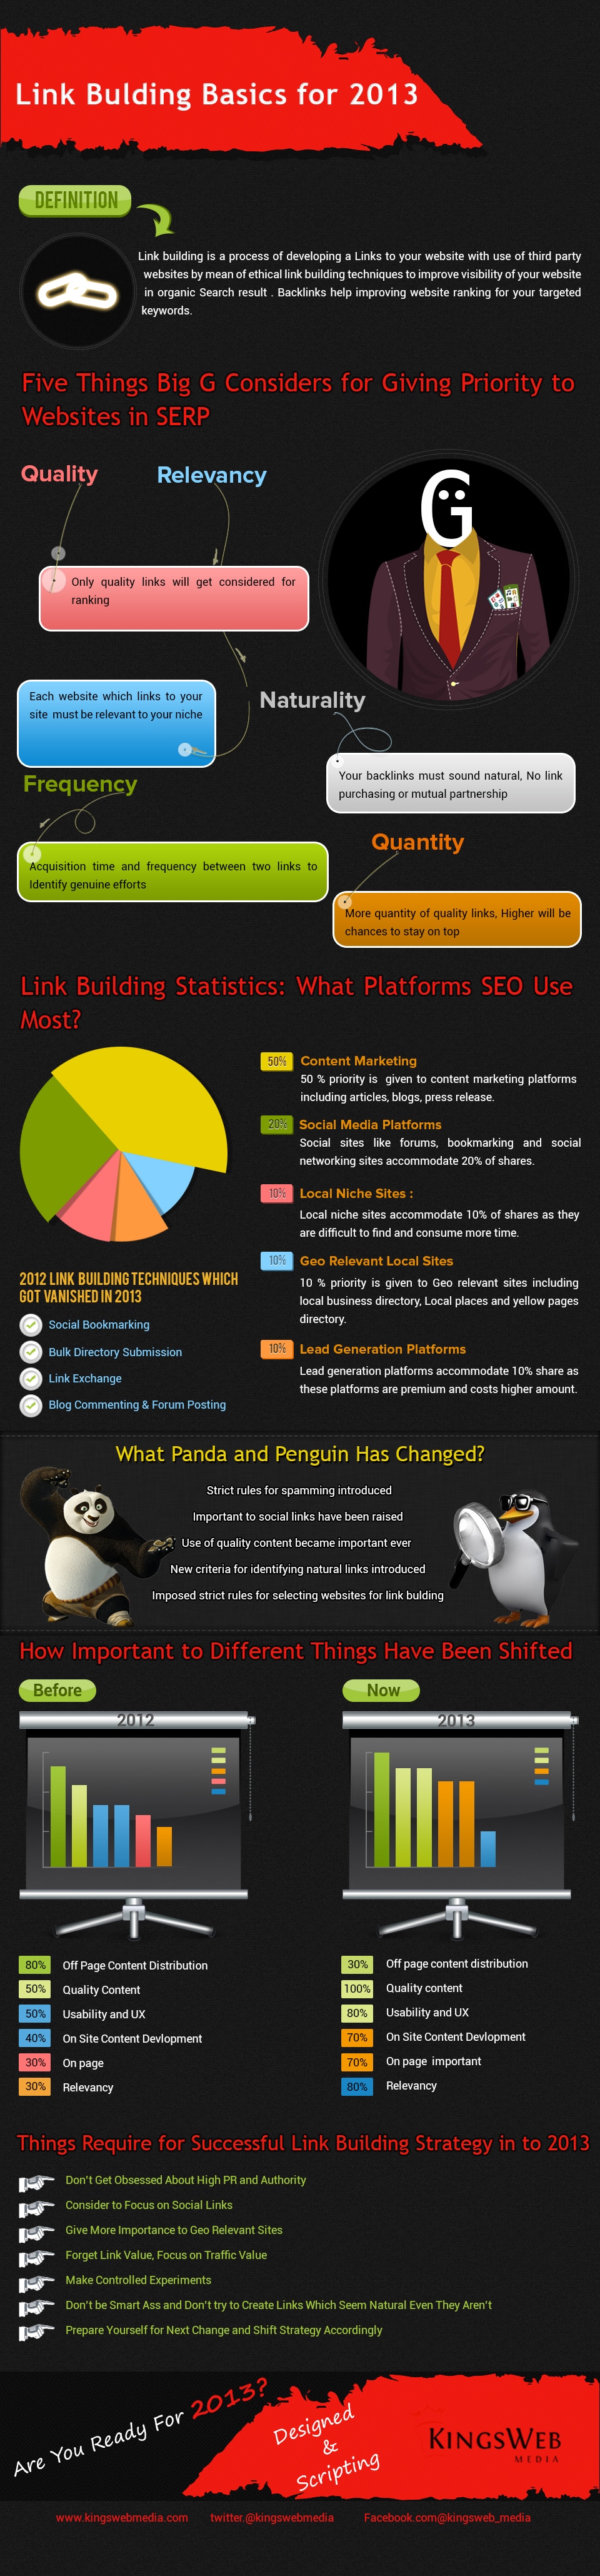 2013-link-building-guide-infographic